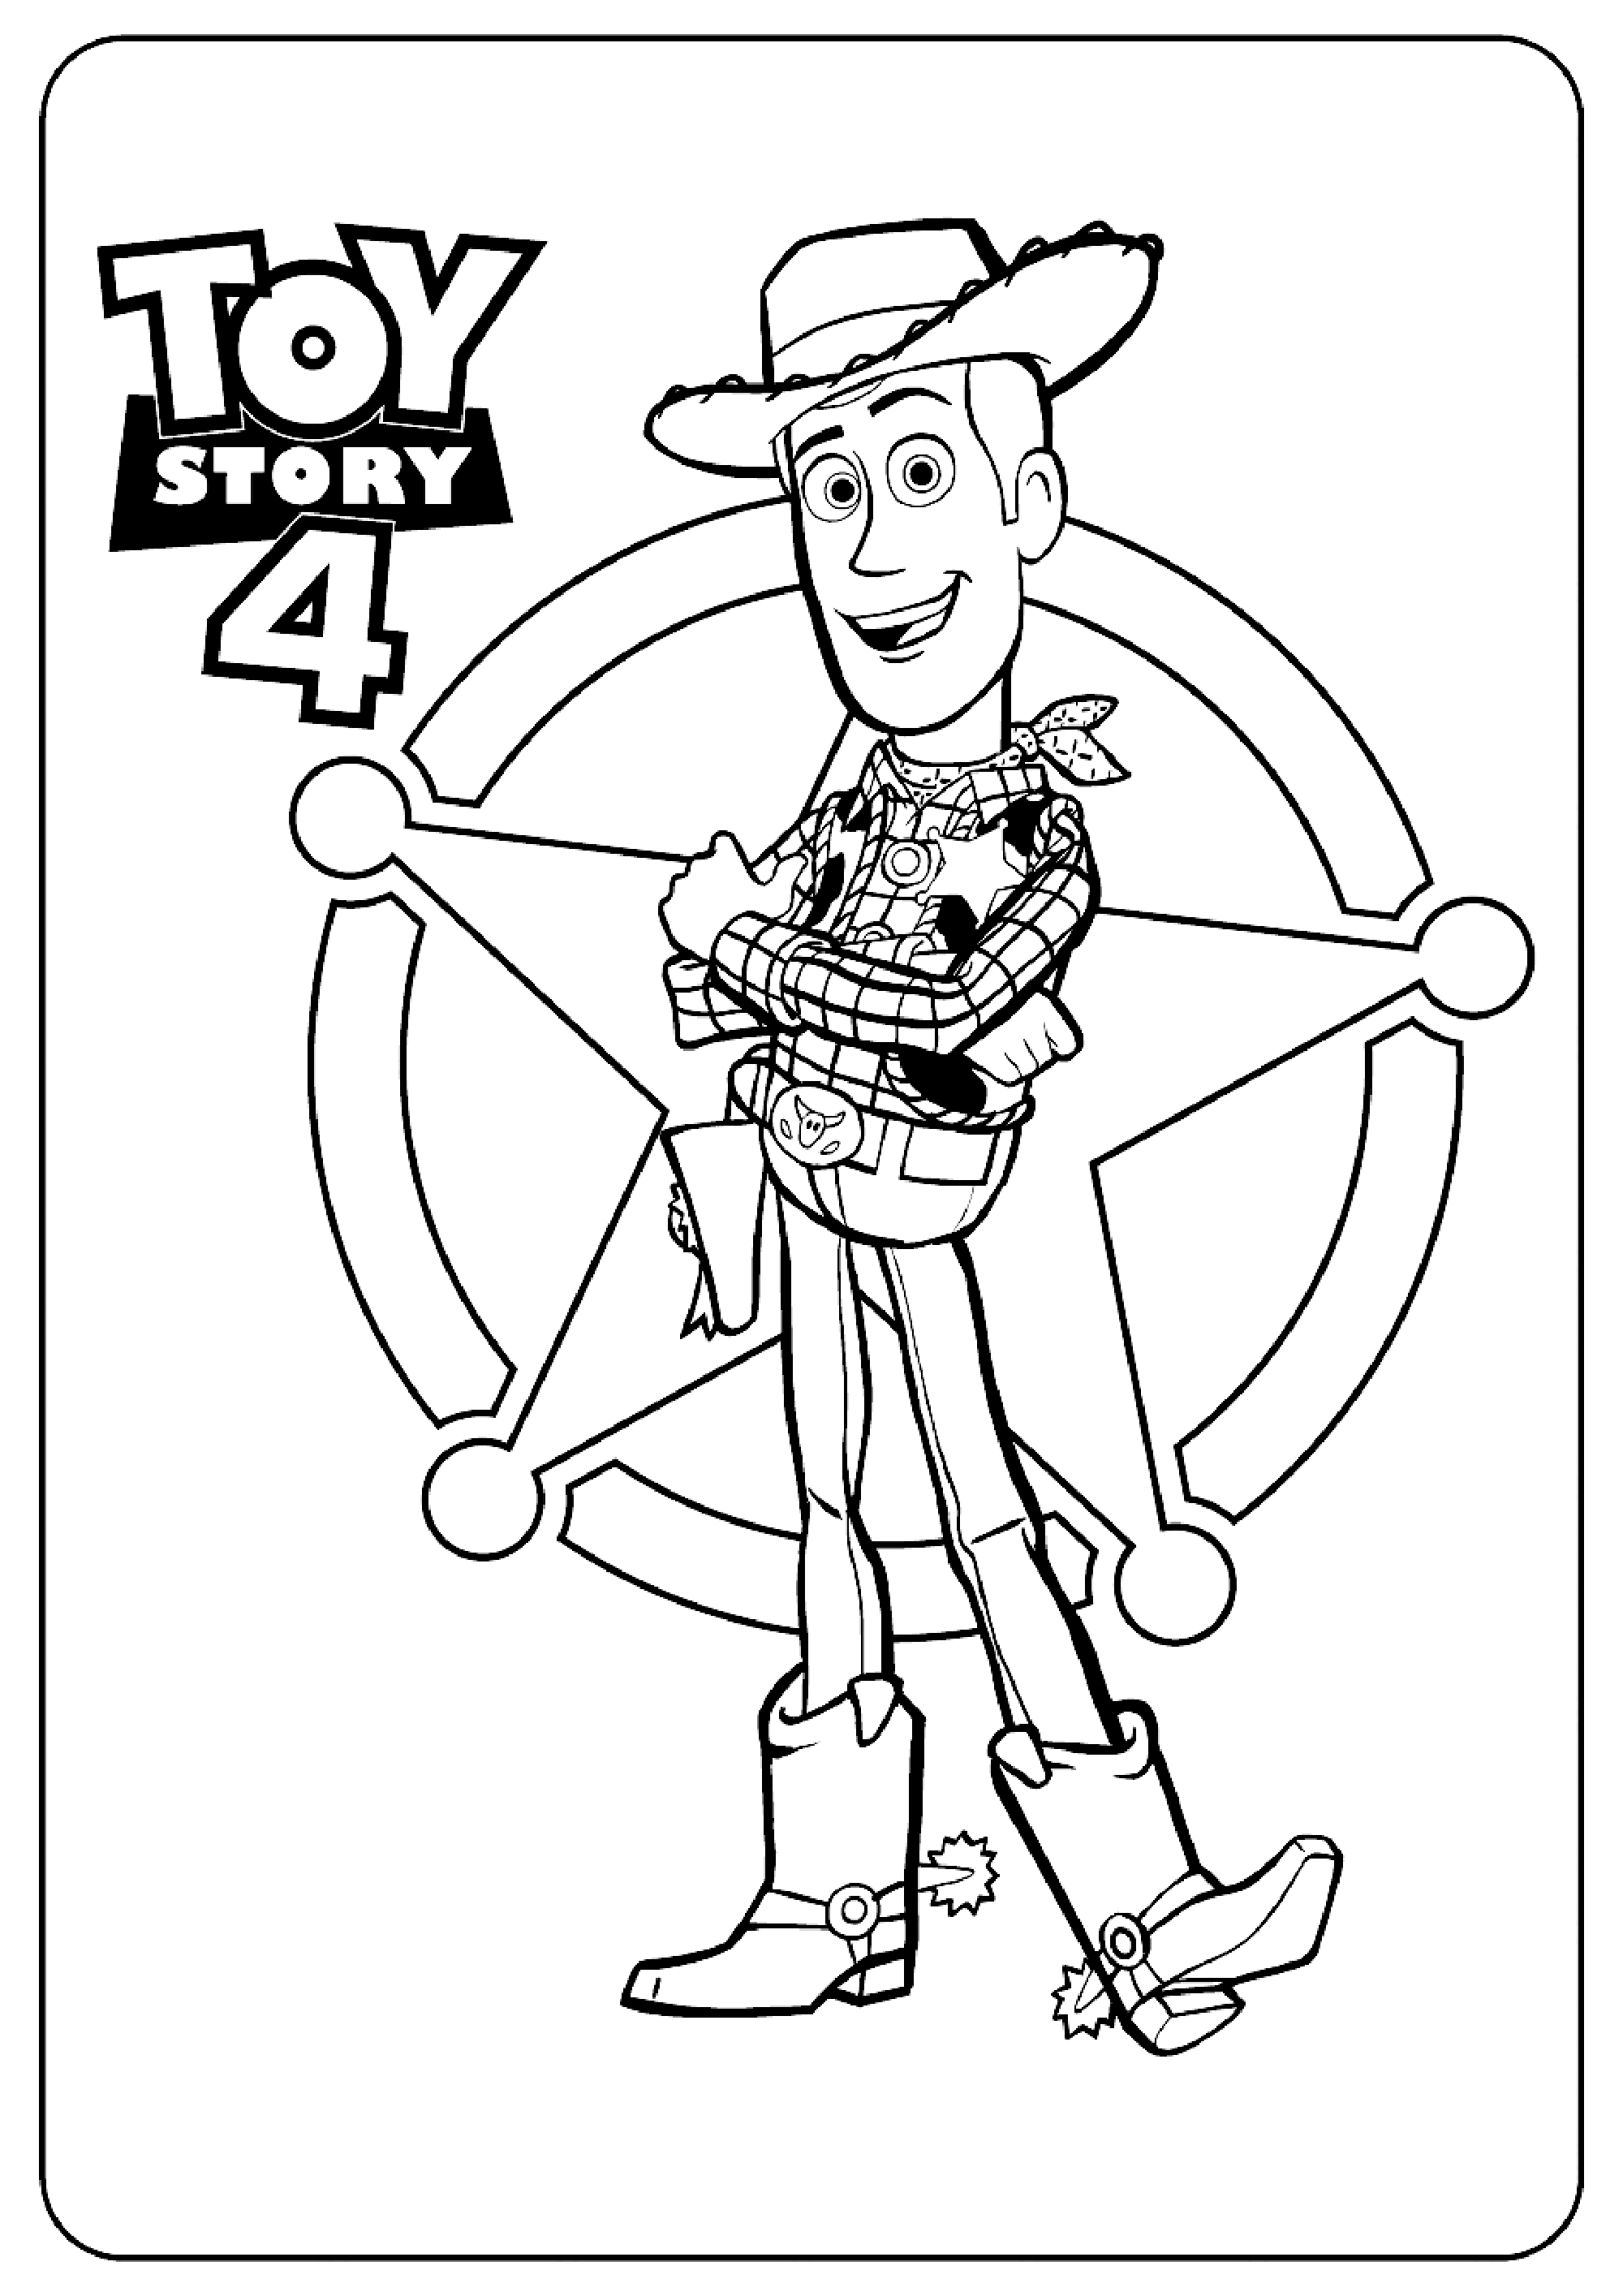 Woody : Toy Story 4 (Disney / pixar) coloring pages Toy Story 4 Kids